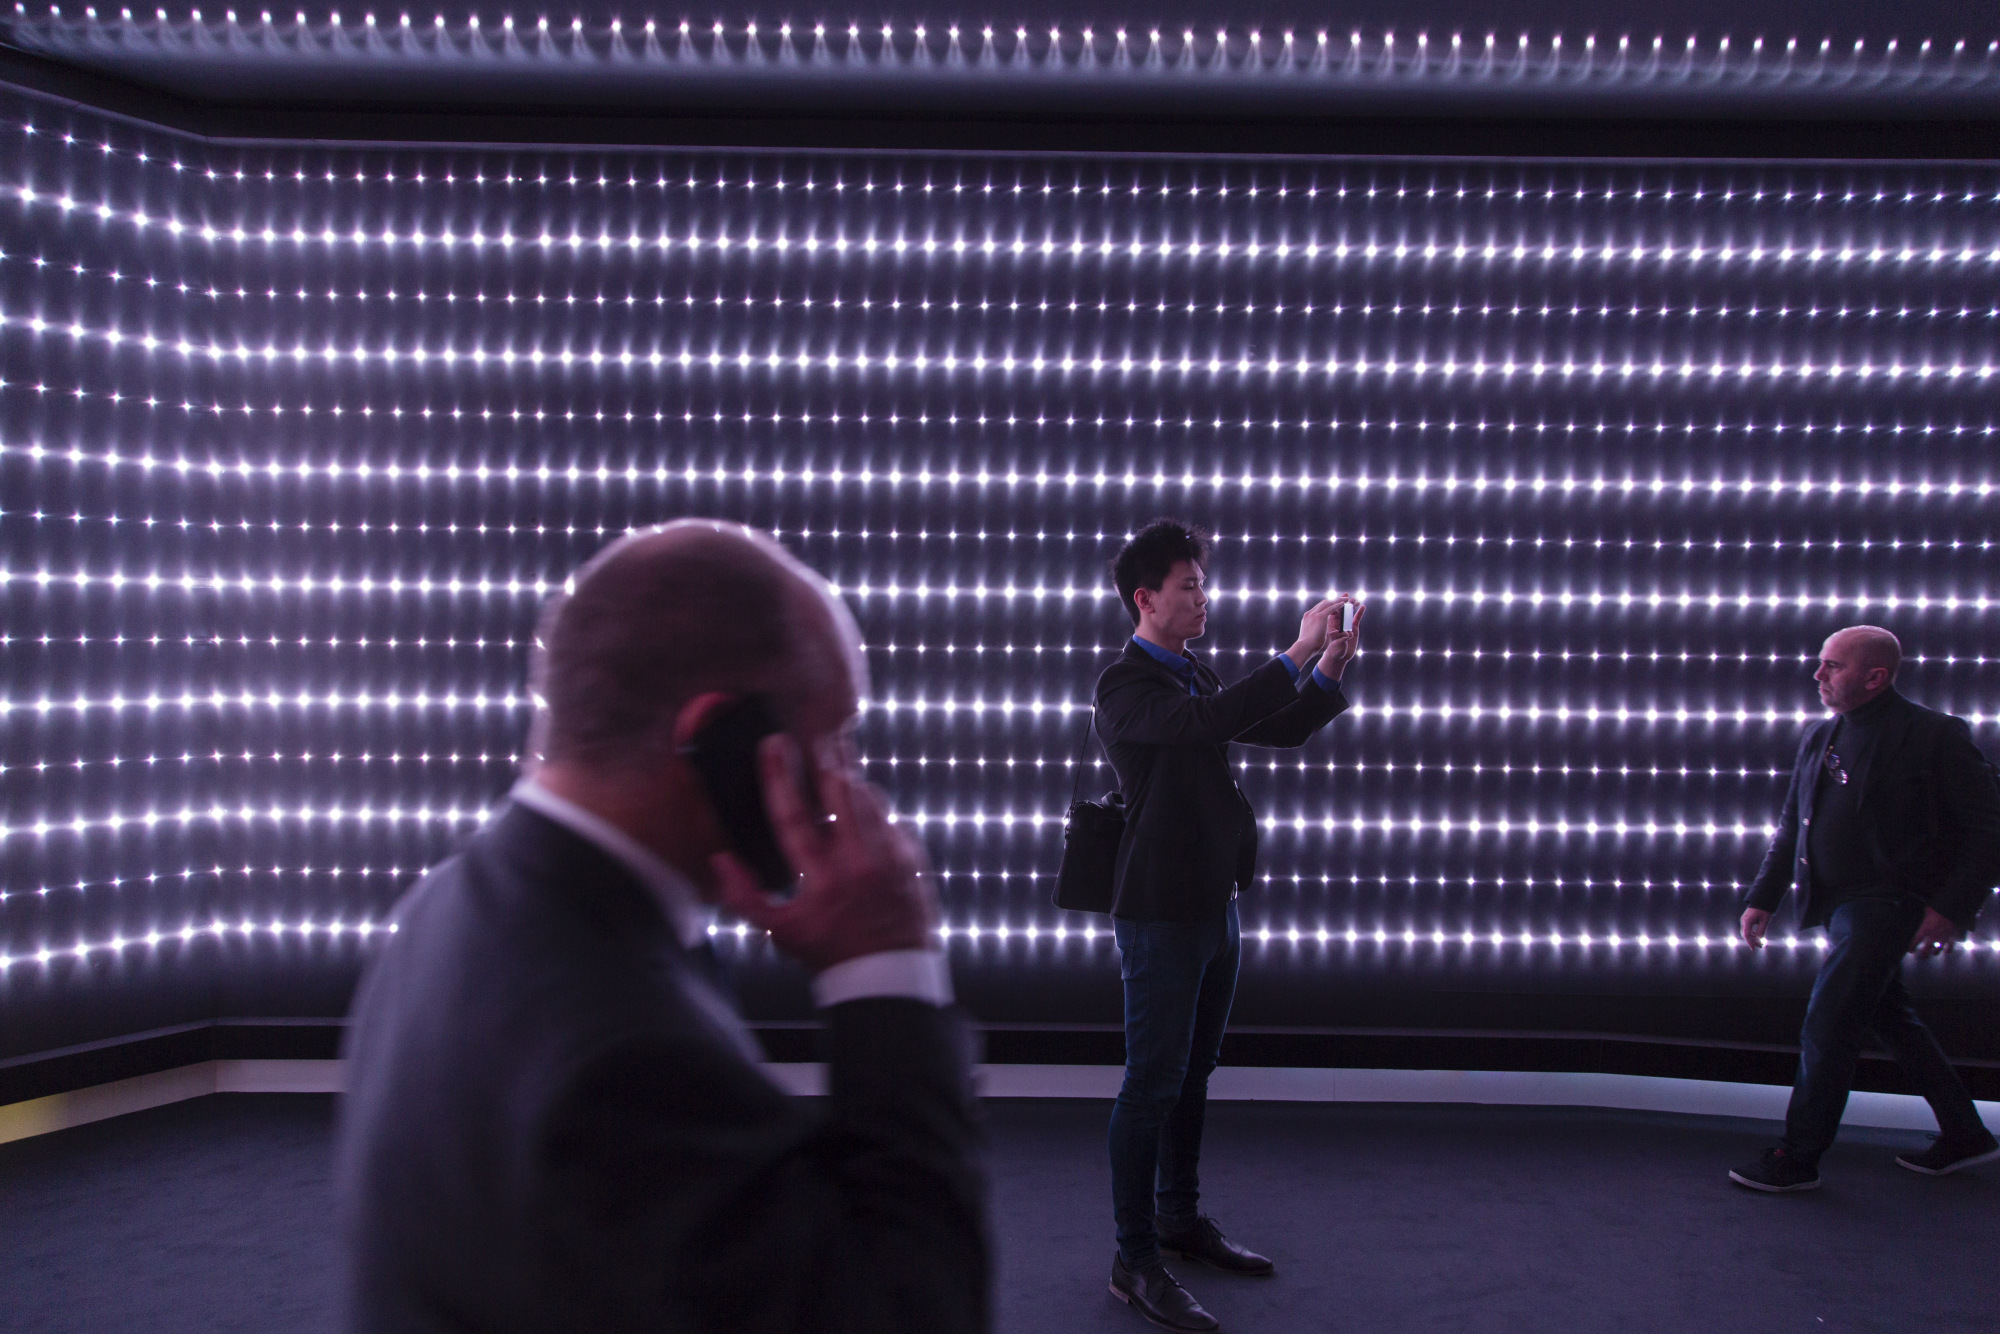 An attendee uses a smartphone to take a photo of a light-emitting diode (LED) display at the Royal Philips NV exhibition stand during the Building + Light trade fair in Frankfurt, Germany.